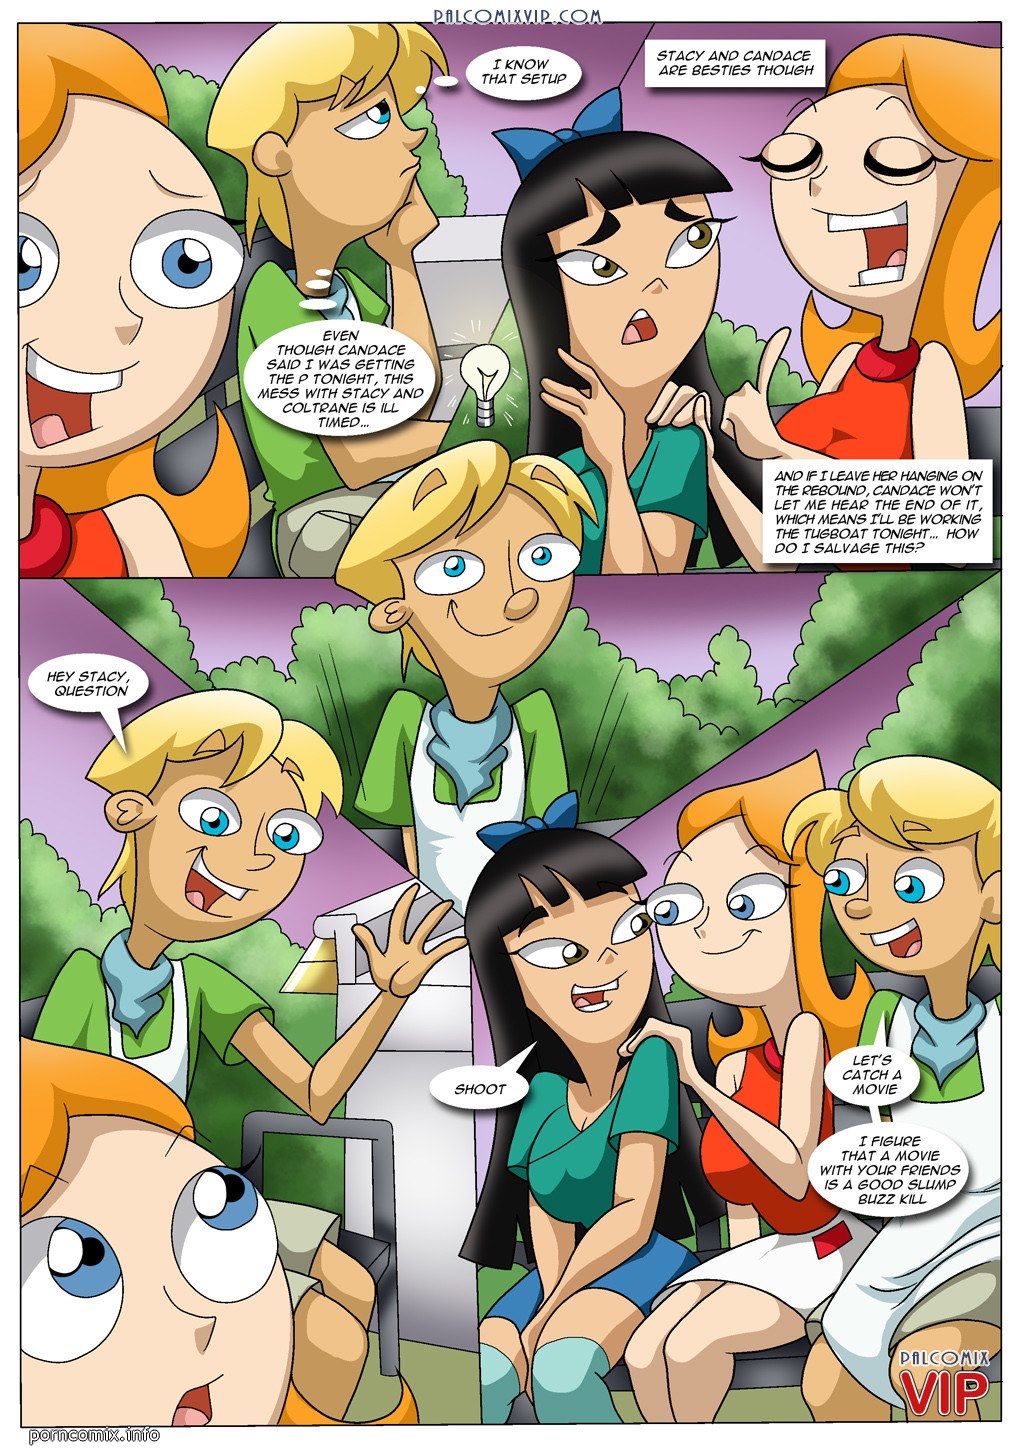 Pal Comix - Phineas And Ferb - Helping Out a Friend page 5